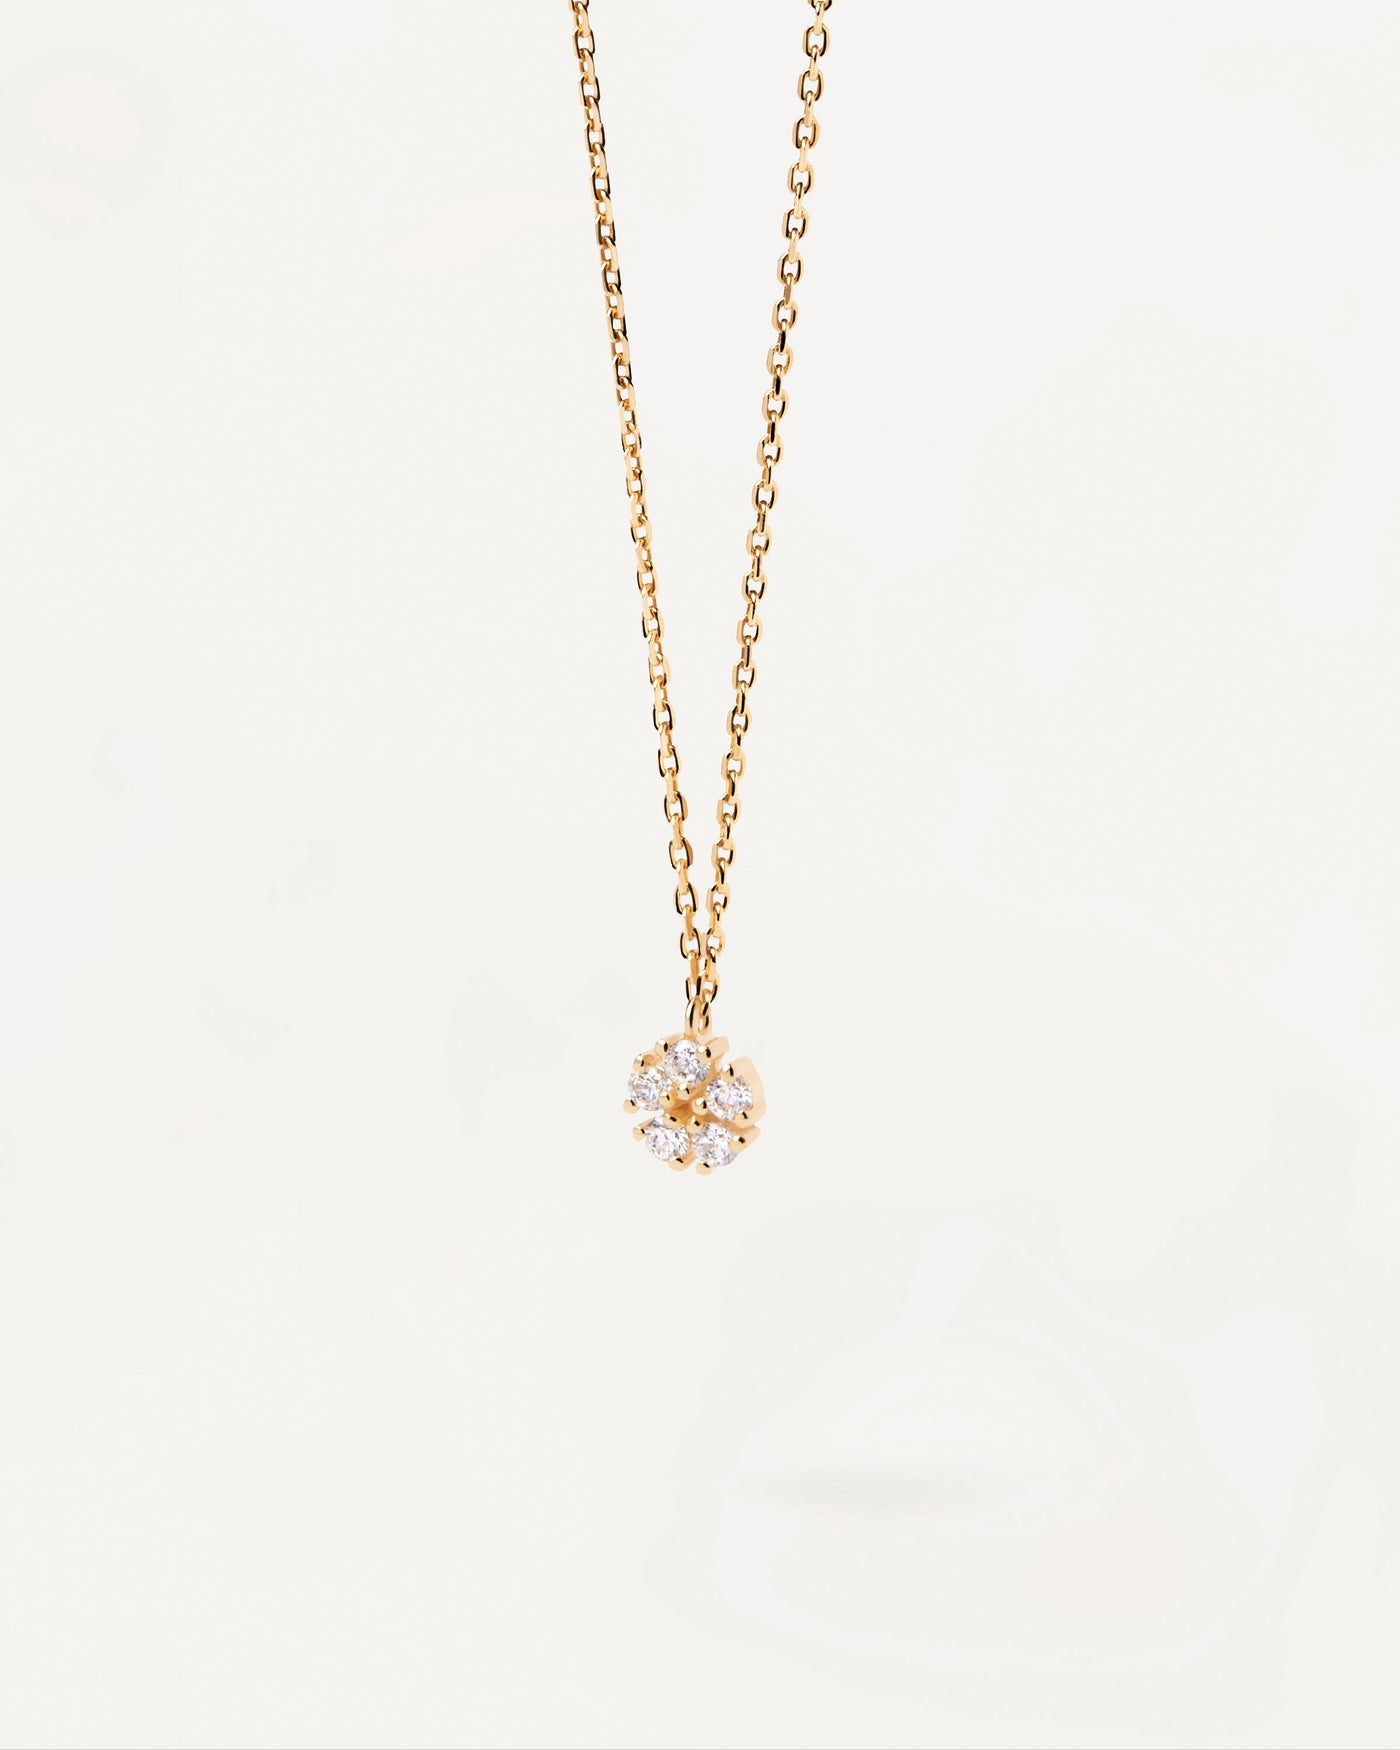 2023 Selection | Daisy Necklace. Gold-plated silver necklace with flower zirconia pendant. Get the latest arrival from PDPAOLA. Place your order safely and get this Best Seller. Free Shipping.